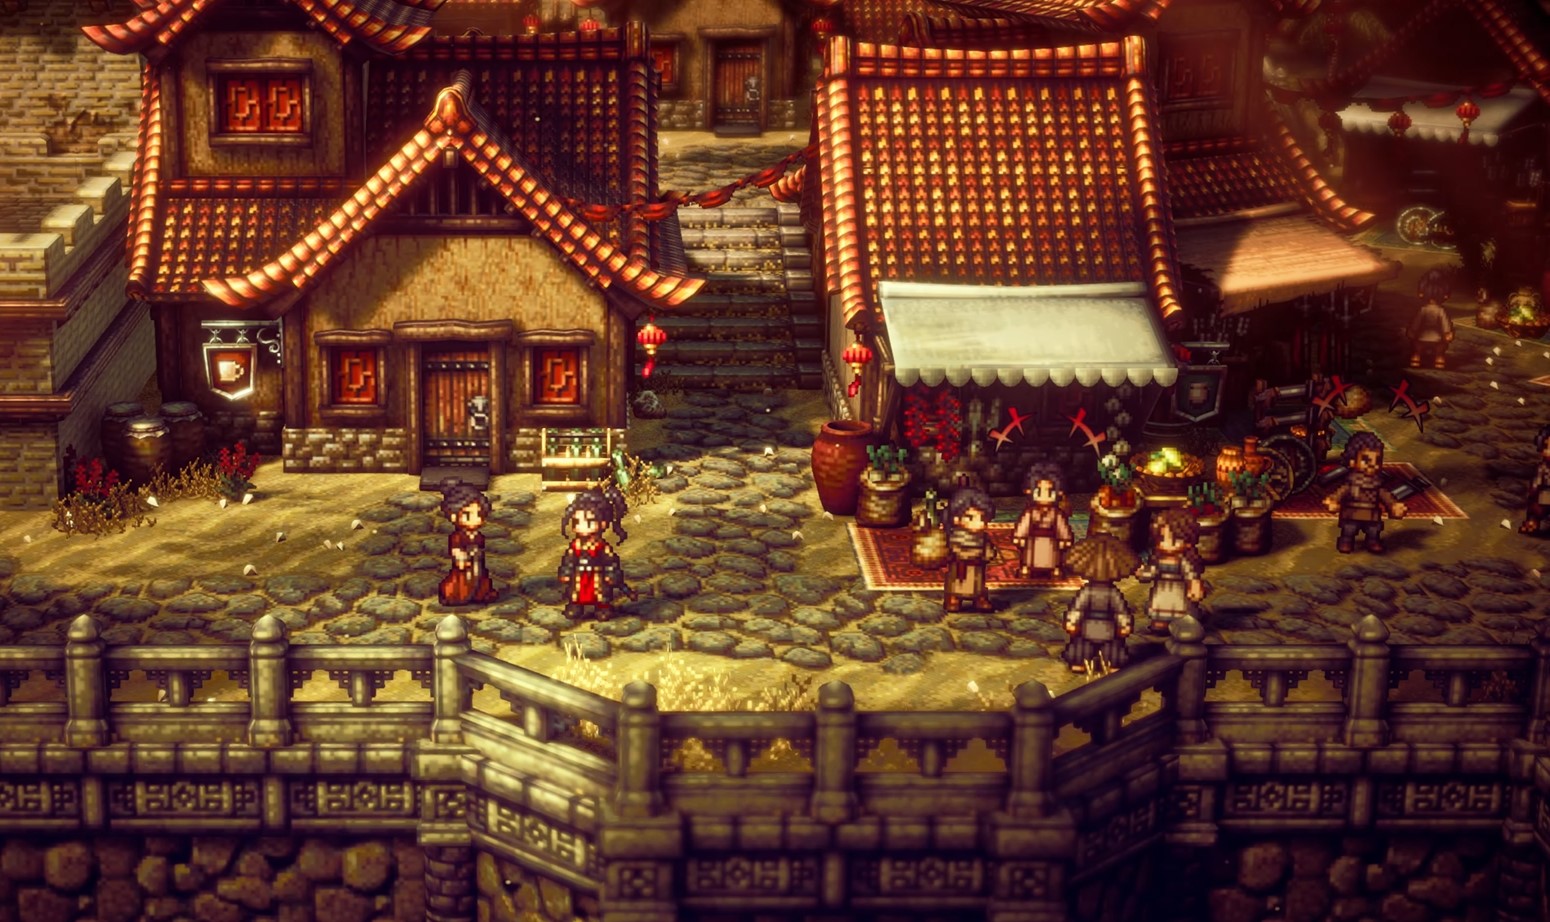 Octopath Traveler 2 for whom the clock tower tolls - how to beat - characters huddled in marketplace